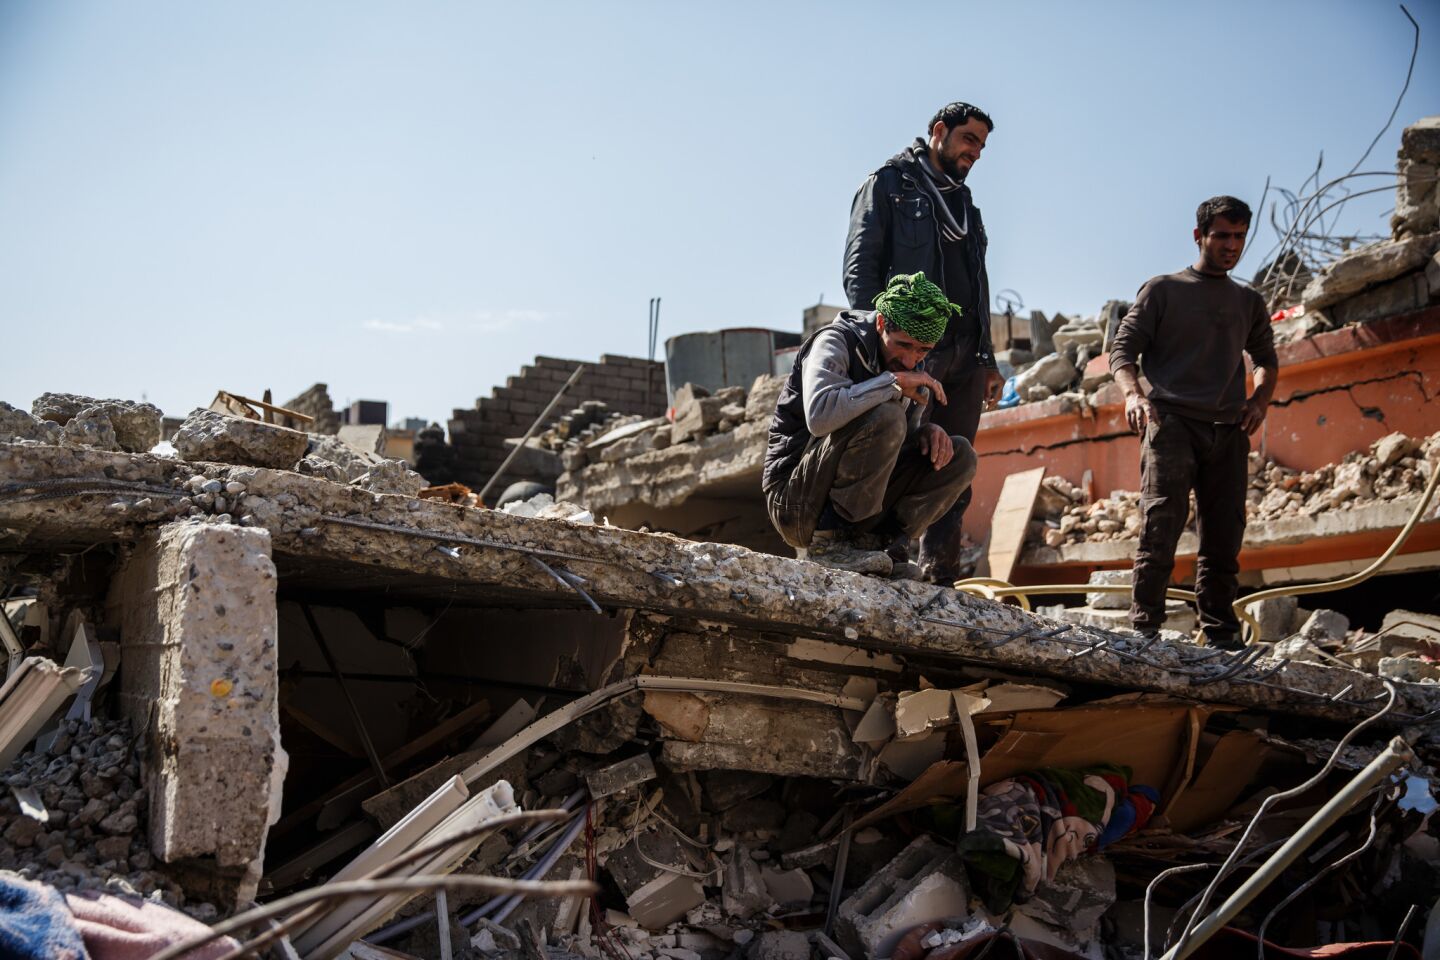 Neighbors and volunteers watch as corpses are pulled out of the rubble of a home destroyed by reported coalition air strikes in the al-Jadida neighborhood of Mosul, Nineveh Province.